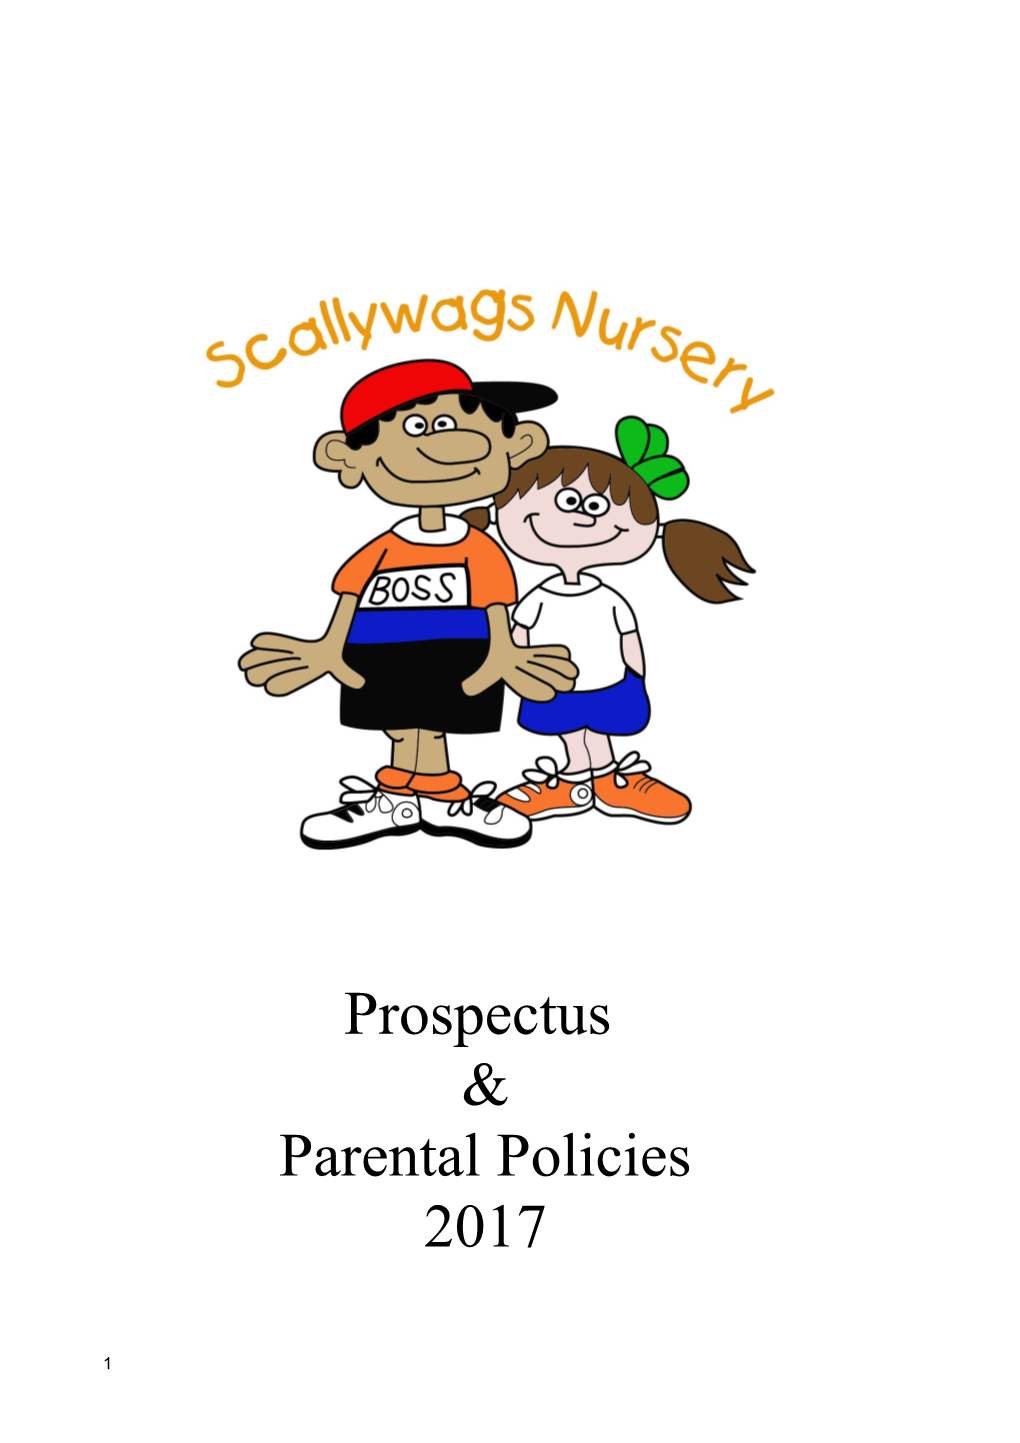 Welcome to Scallywags Nursery Chelmsford